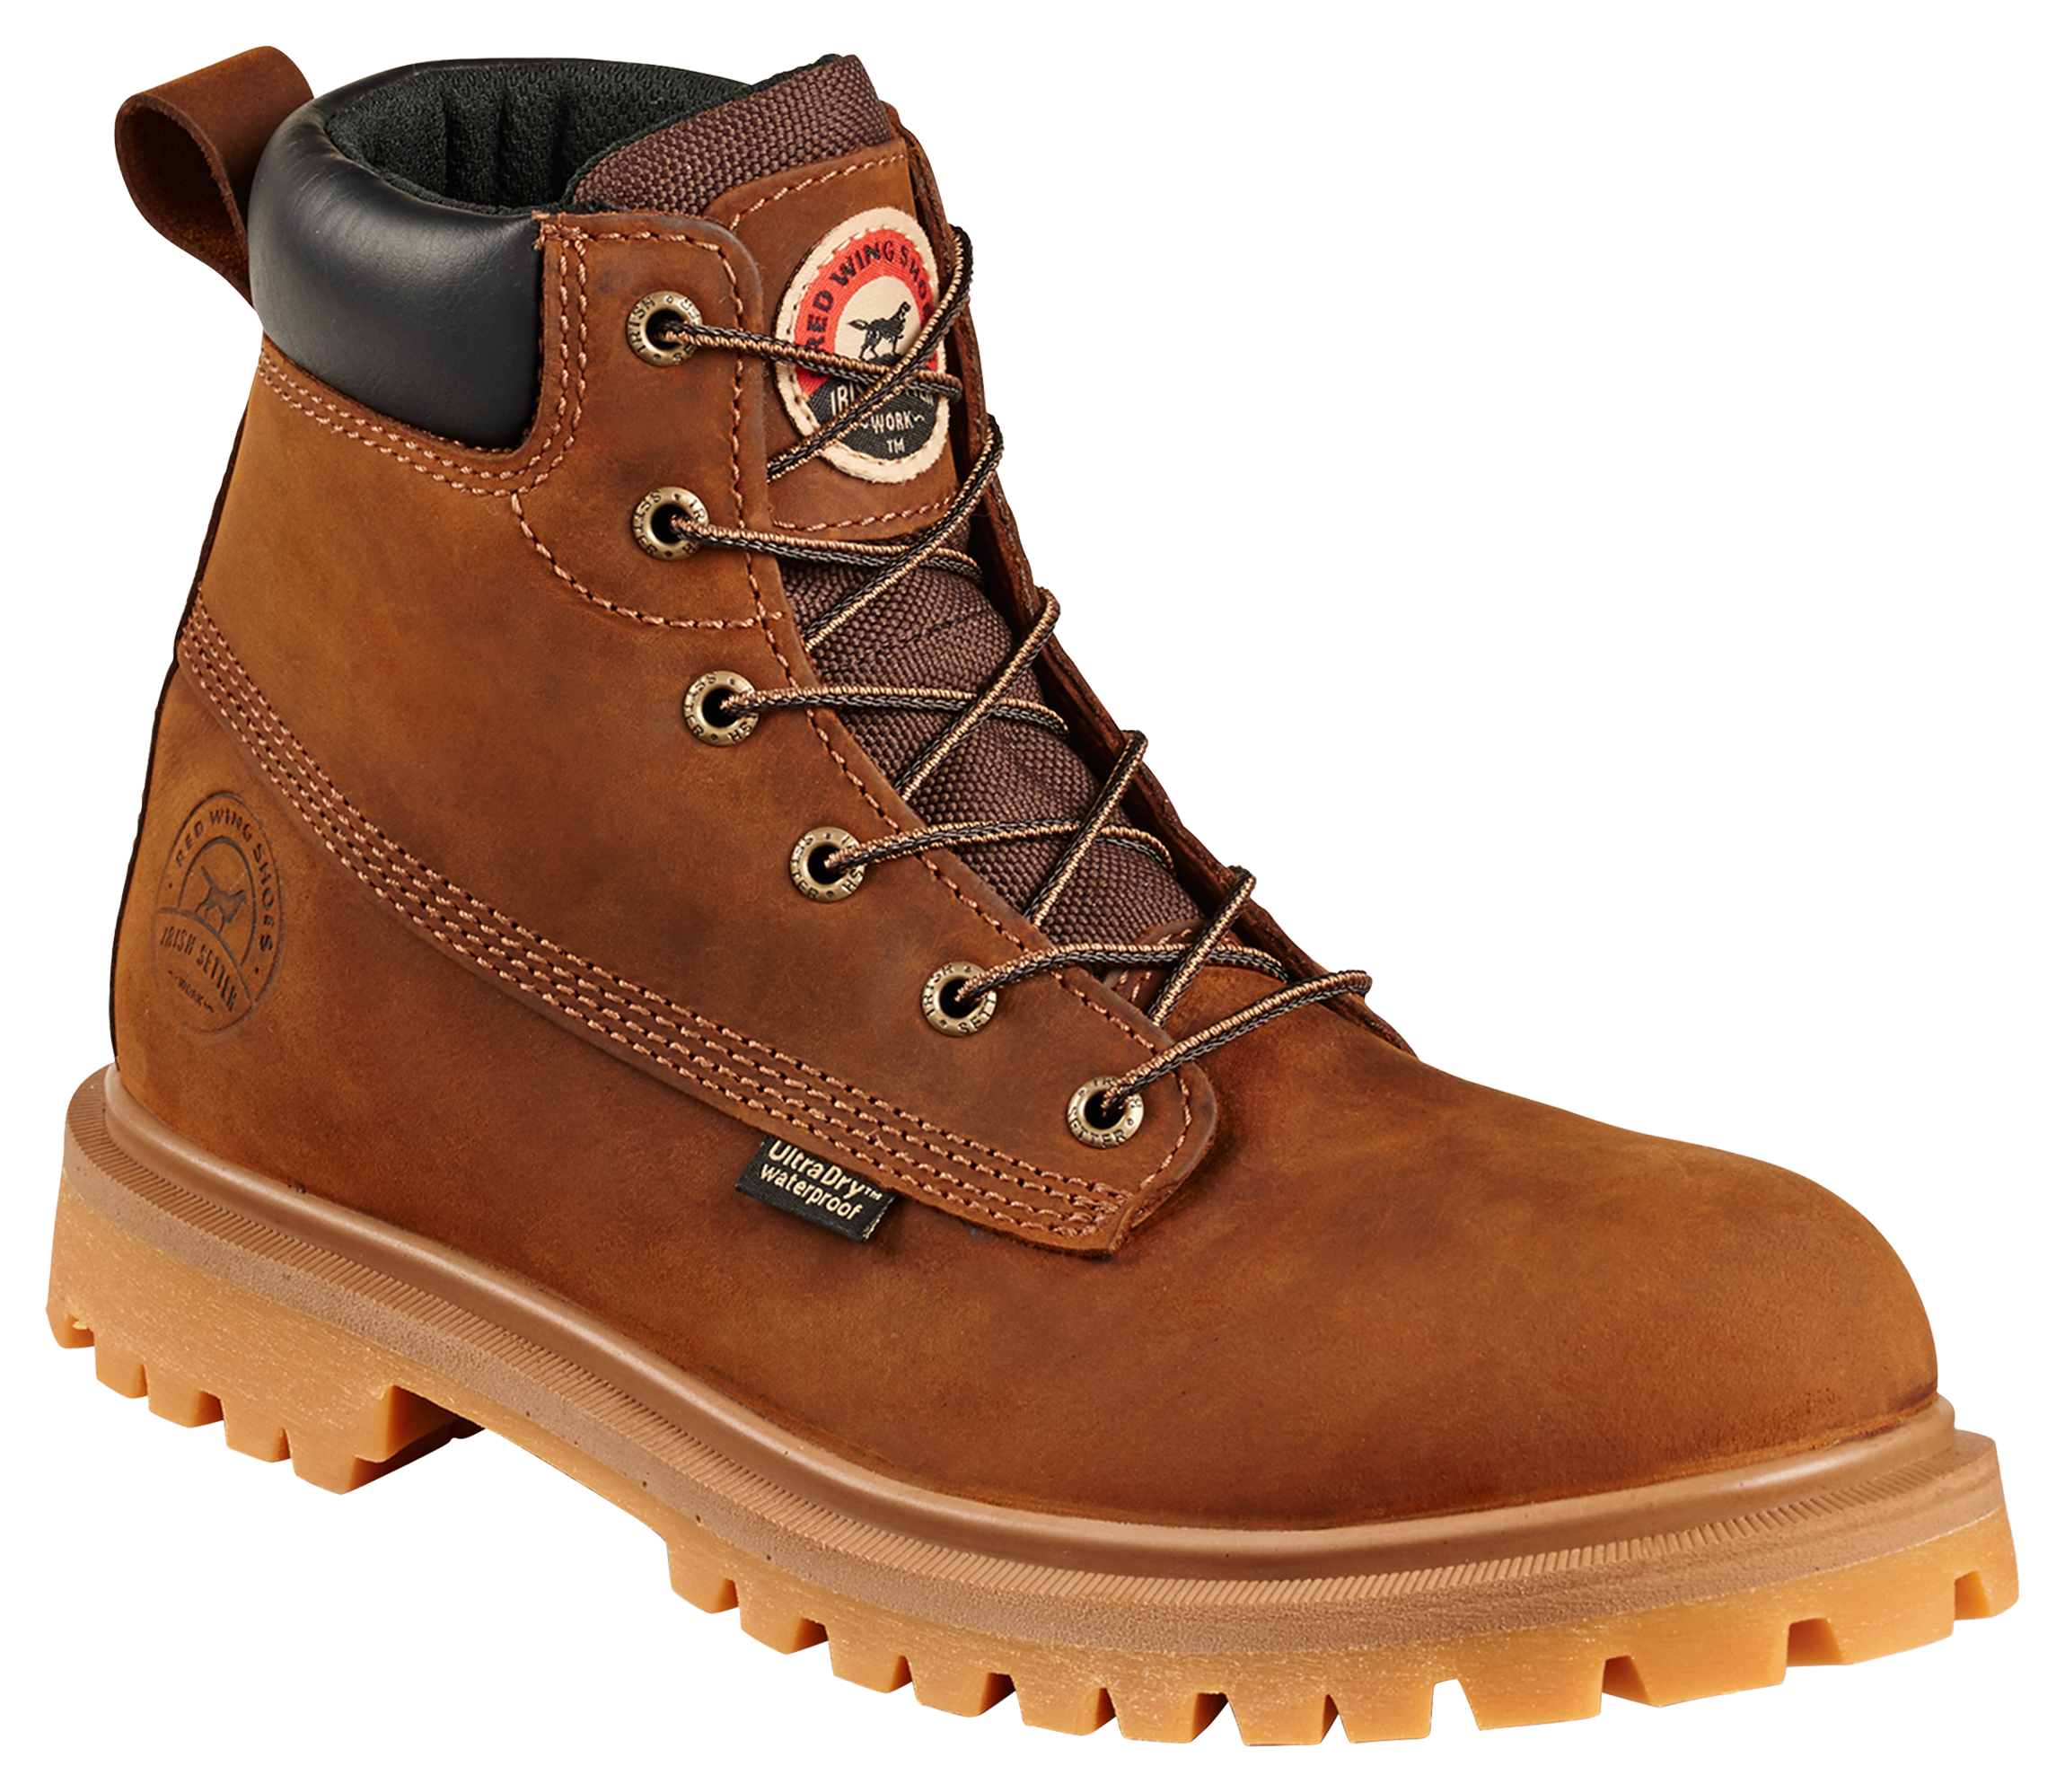 Irish Setter Hopkins Waterproof Safety Toe Leather Work Boots for Men